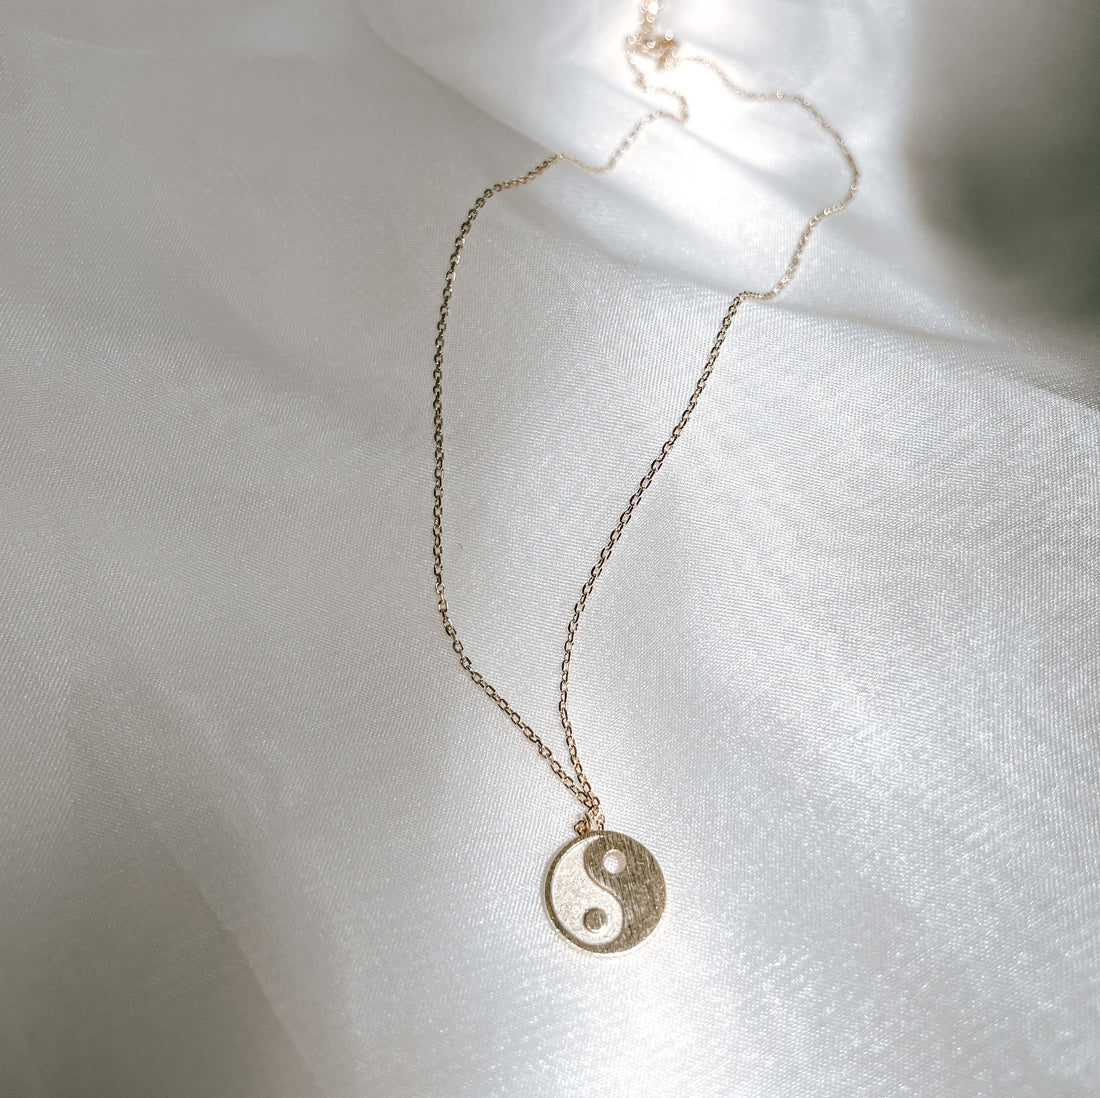 Ying & Yang Gold Necklace